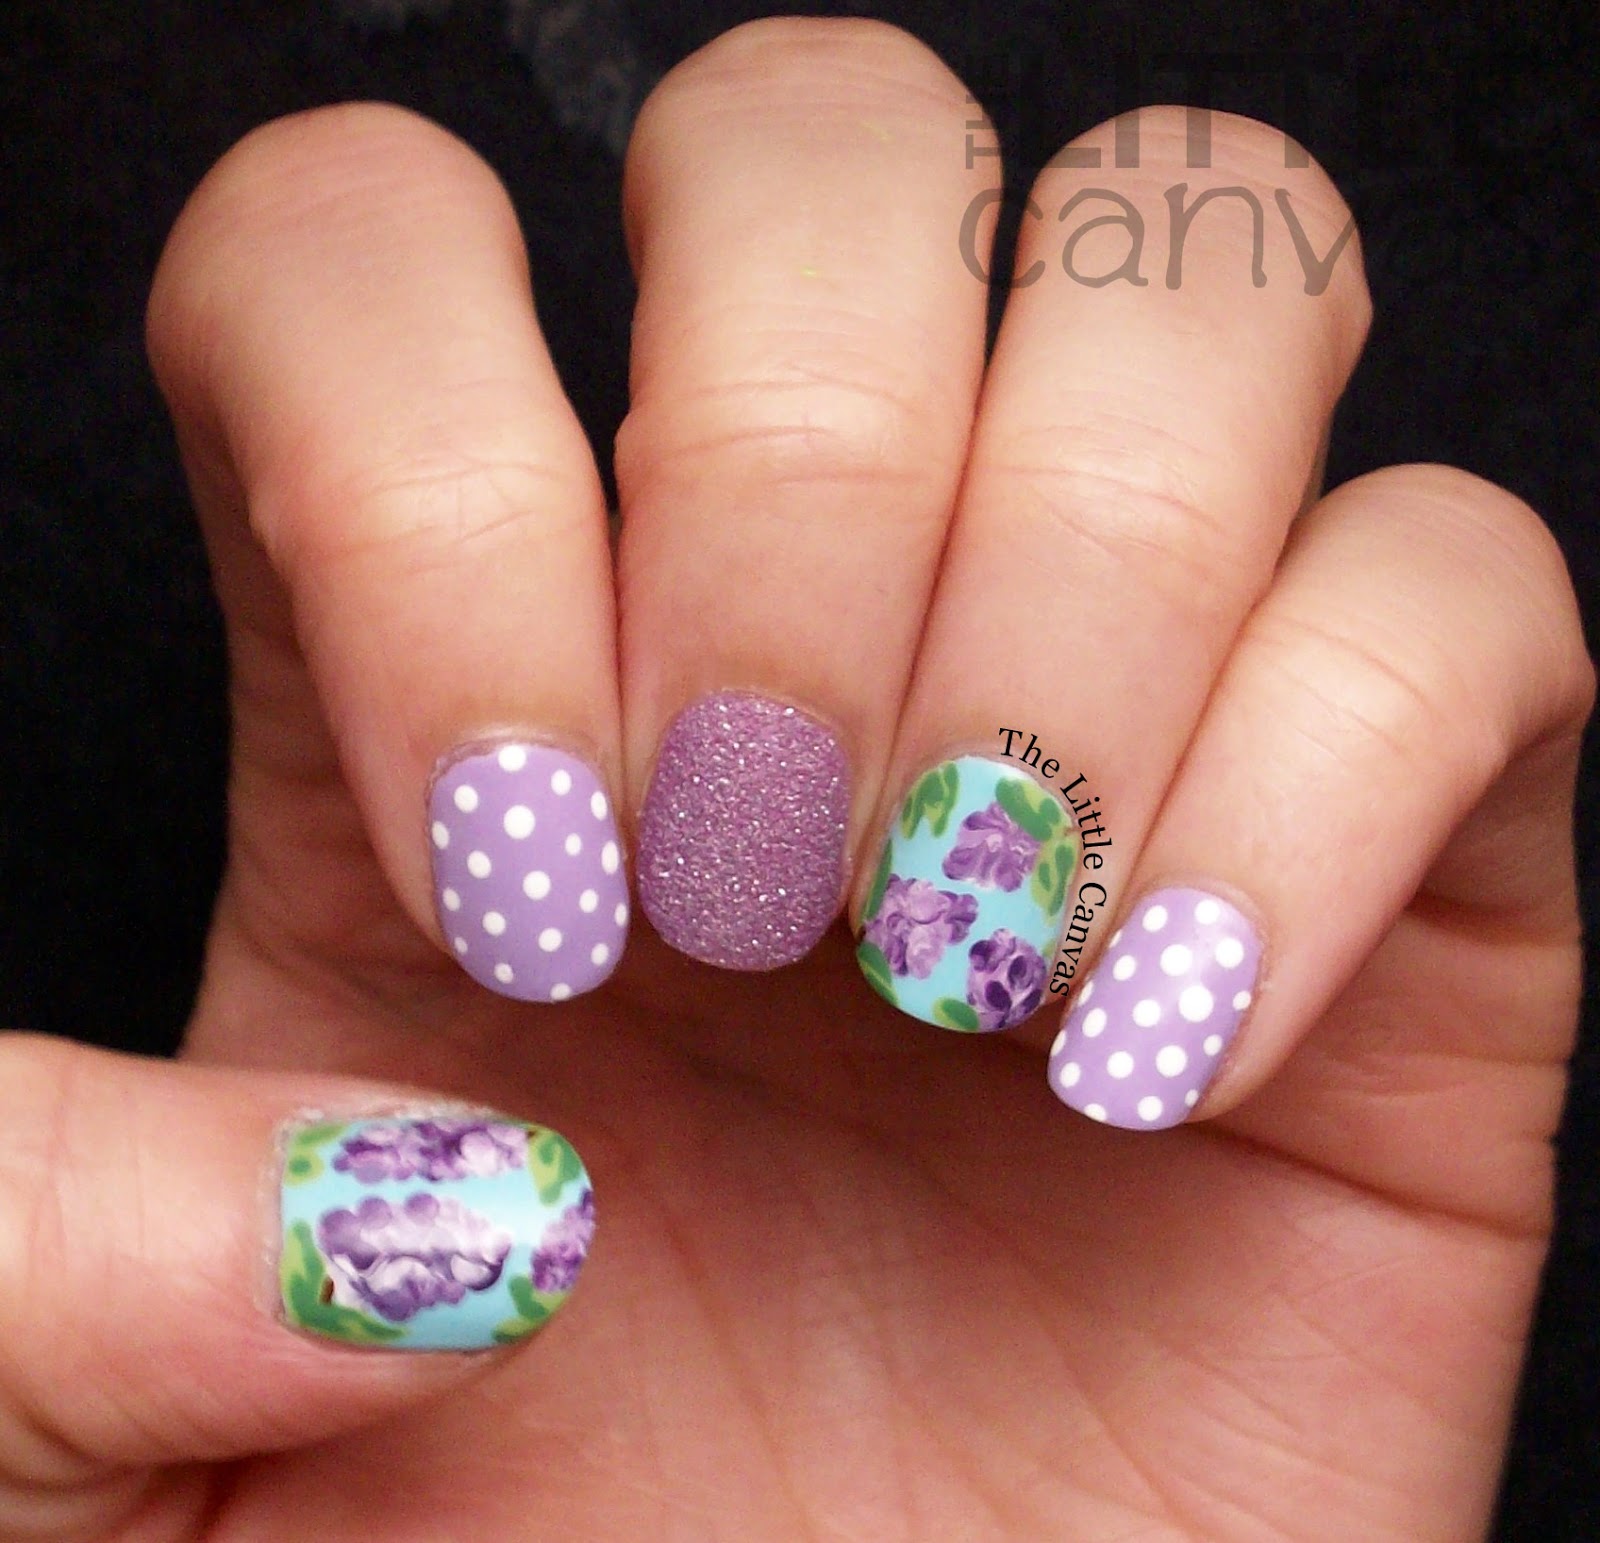 Lilac Nail Art - The Little Canvas